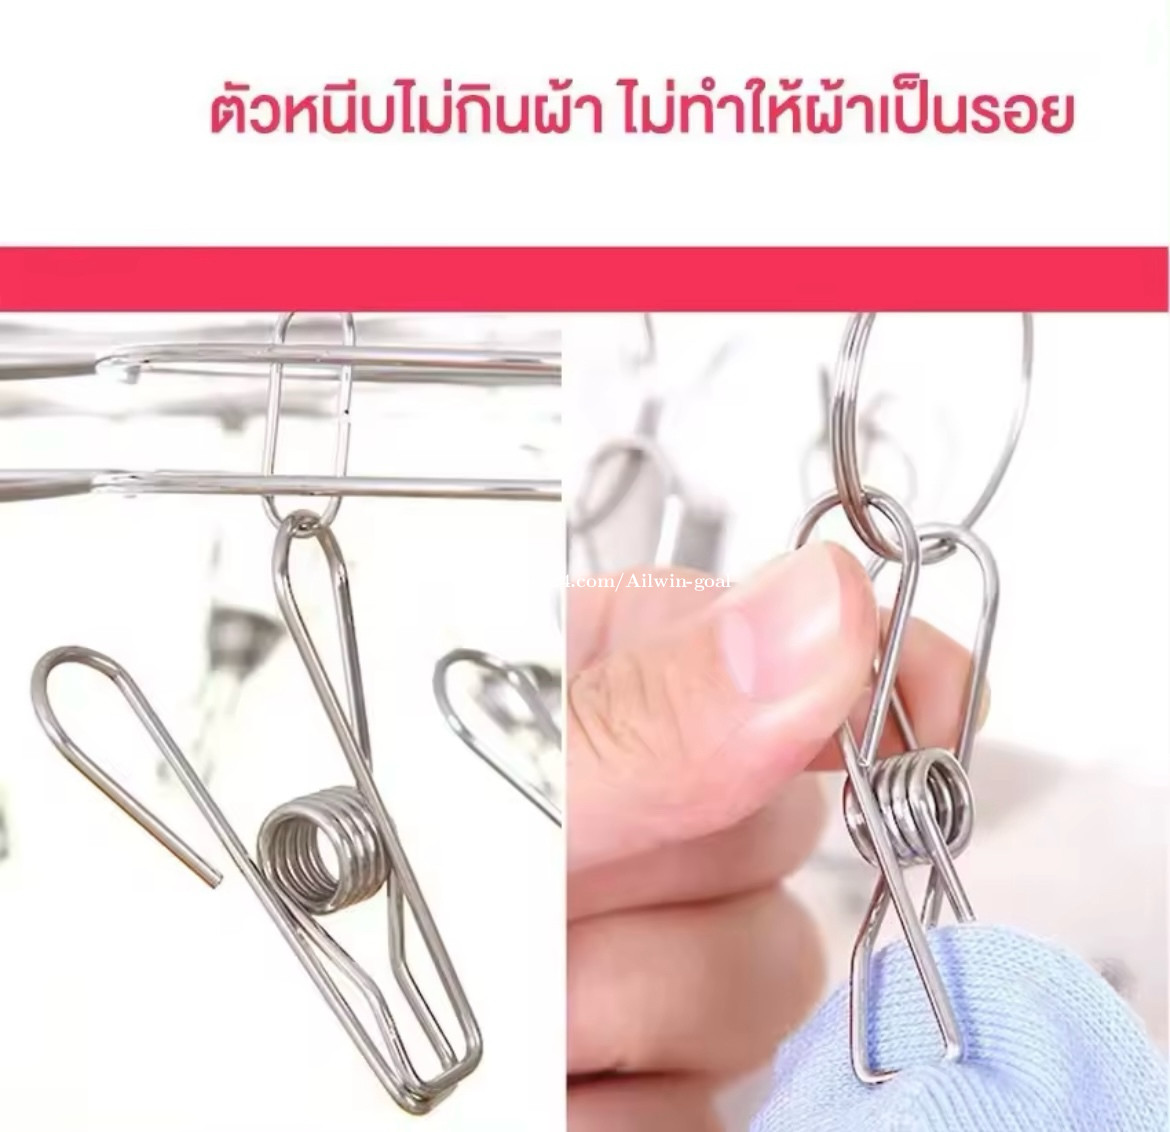 https://images.khmer24.co/23-12-23/baby-hanger-clothes-easy-to-used-have-40pcs-for-hangers-clothes-u2764-ufe0f-ud83d-udd25-ud83d-udc9d-u2764-ufe0f-ud83d-ud-616489170331505482720882-d.jpg